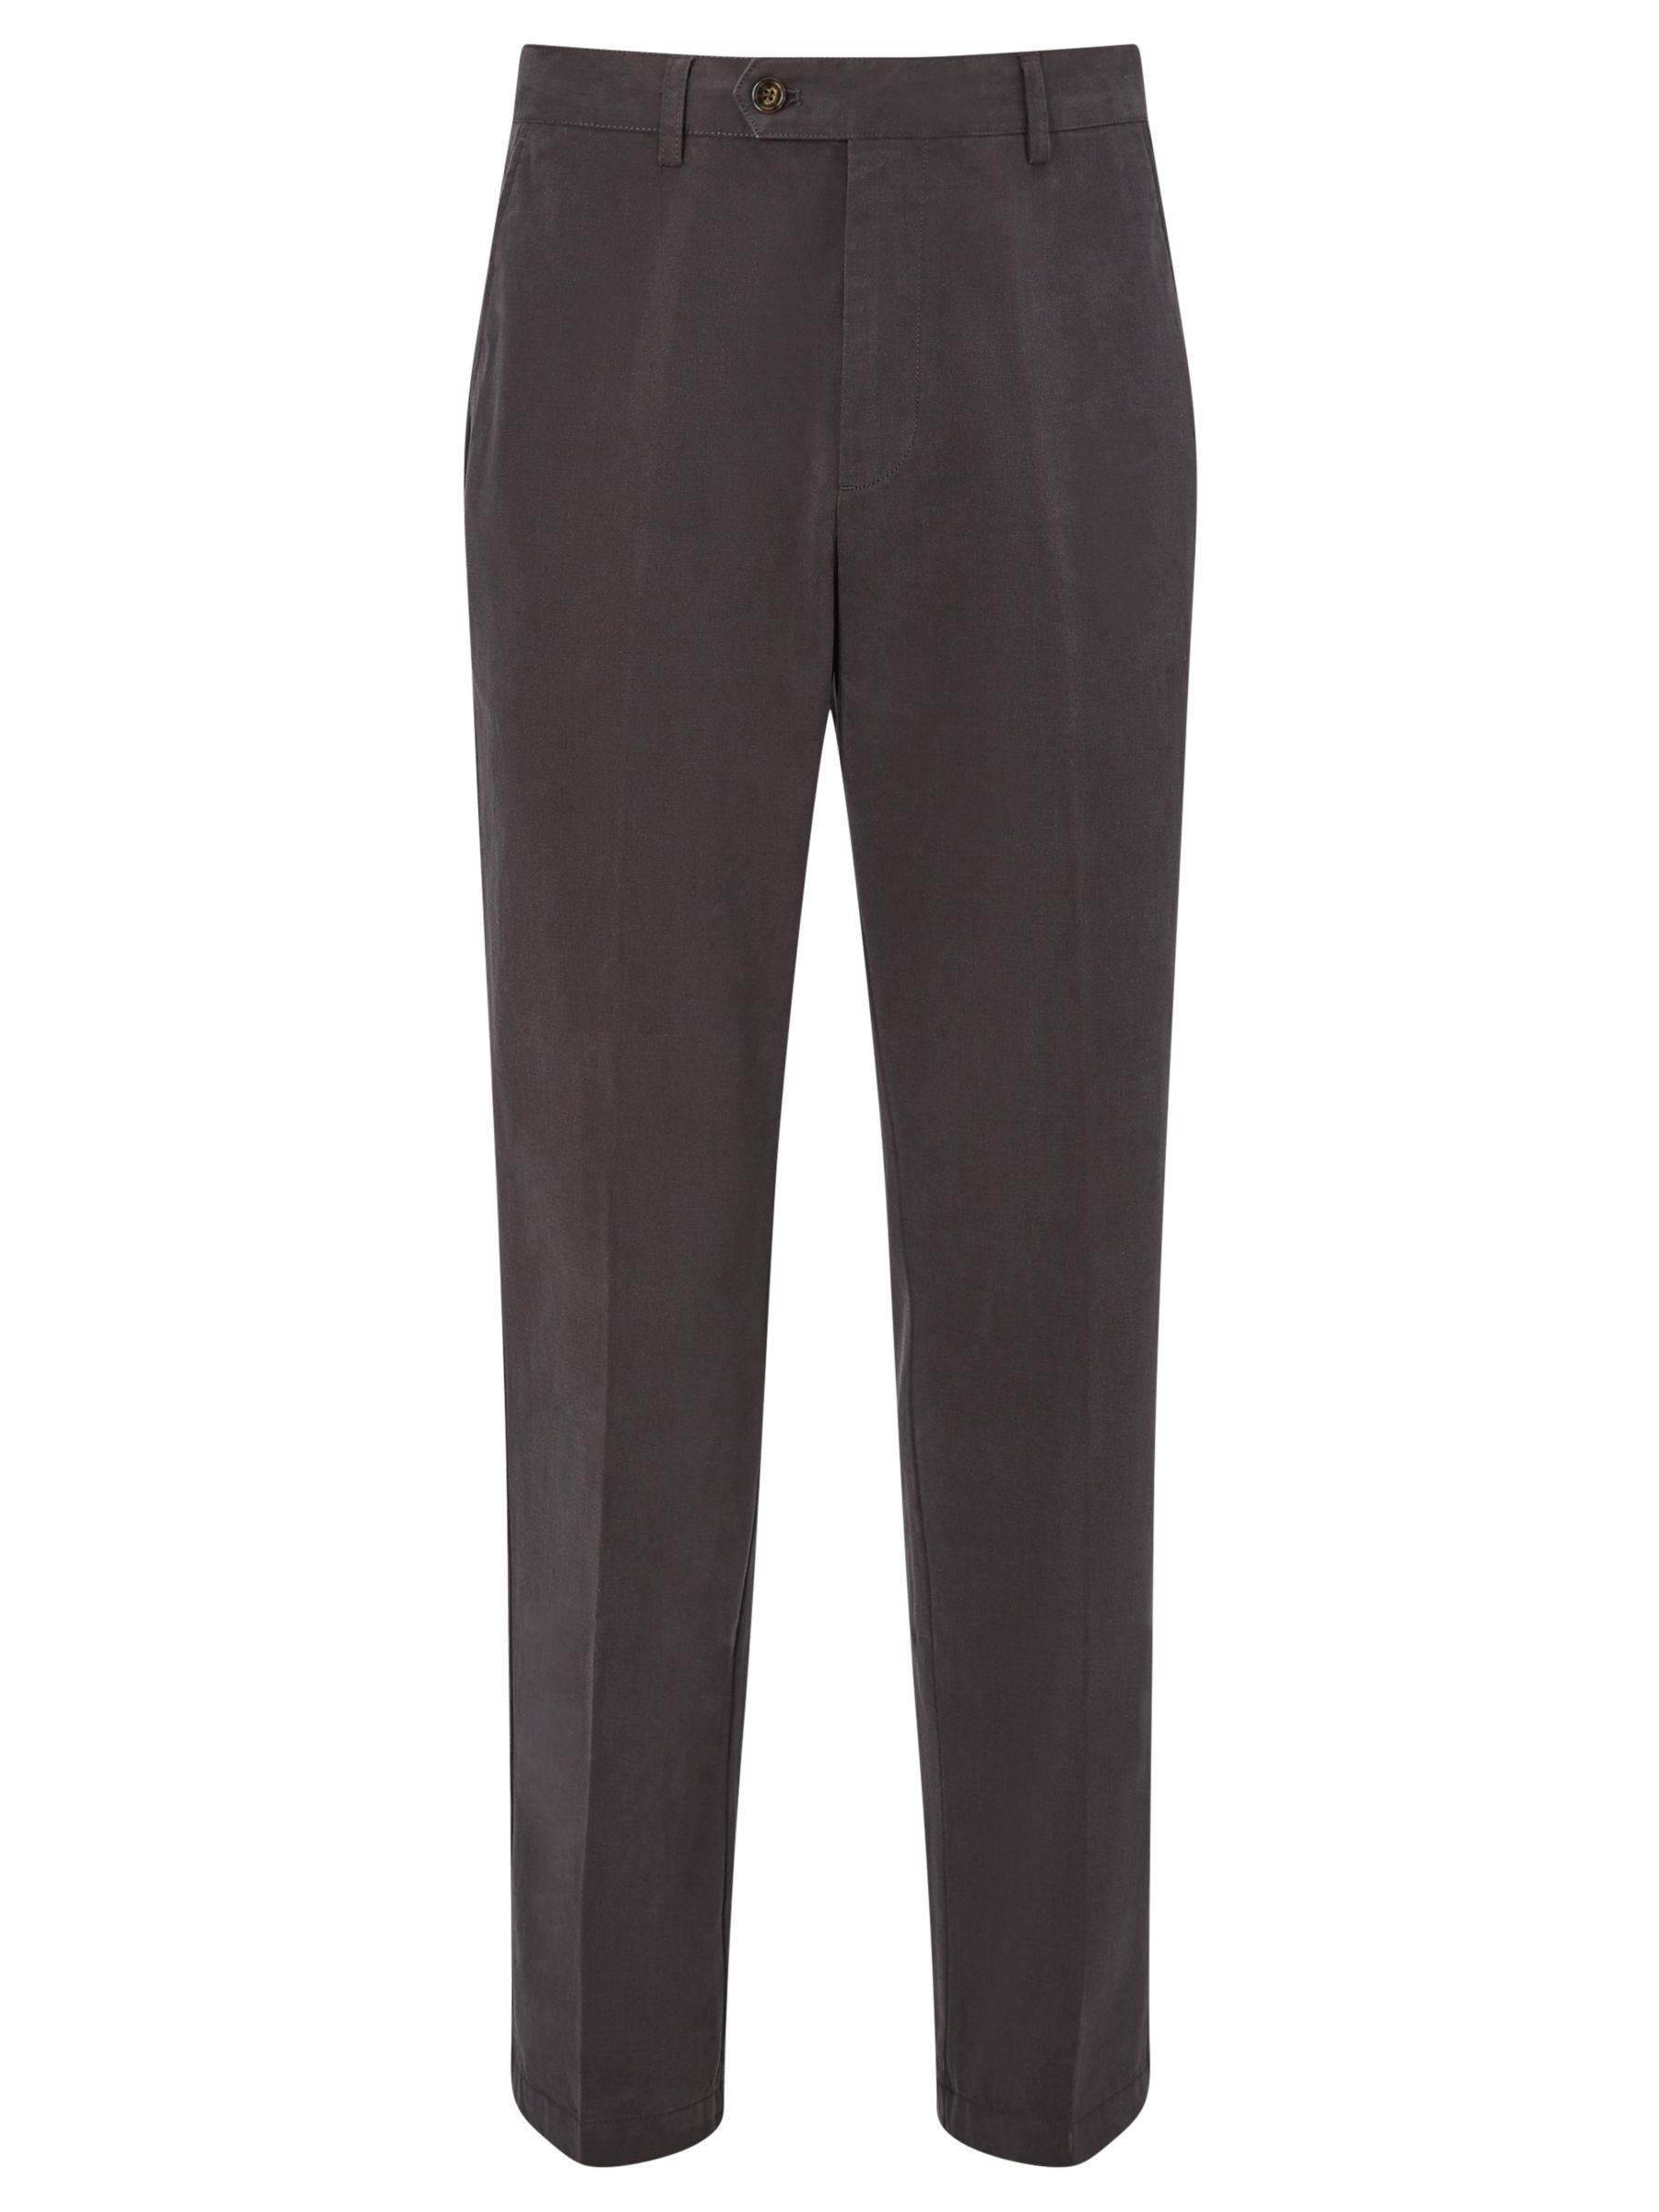 John Lewis & Partners Wrinkle Free Flat Front Trousers, Grey, 36S